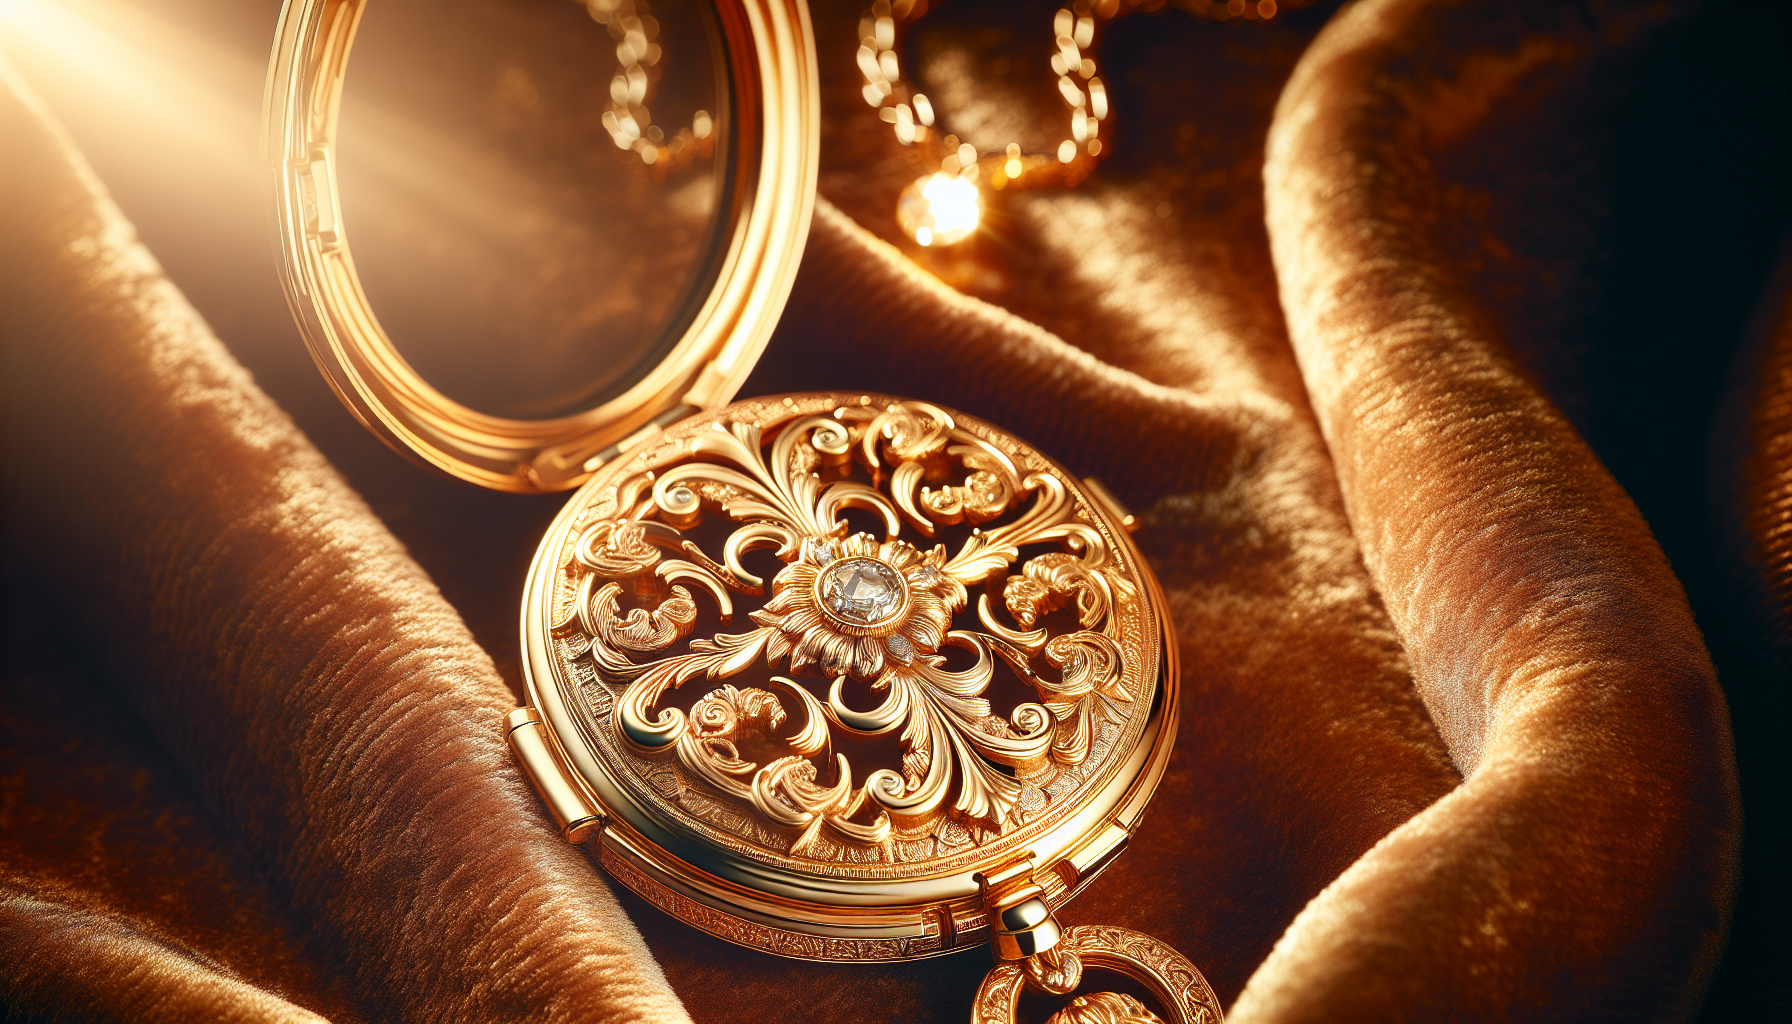 A stunning image showcasing the elegance and charm of gold locket pendants. The image should highlight the intricate detailing and craftsmanship surrounding the intricate designs and tender artistry i